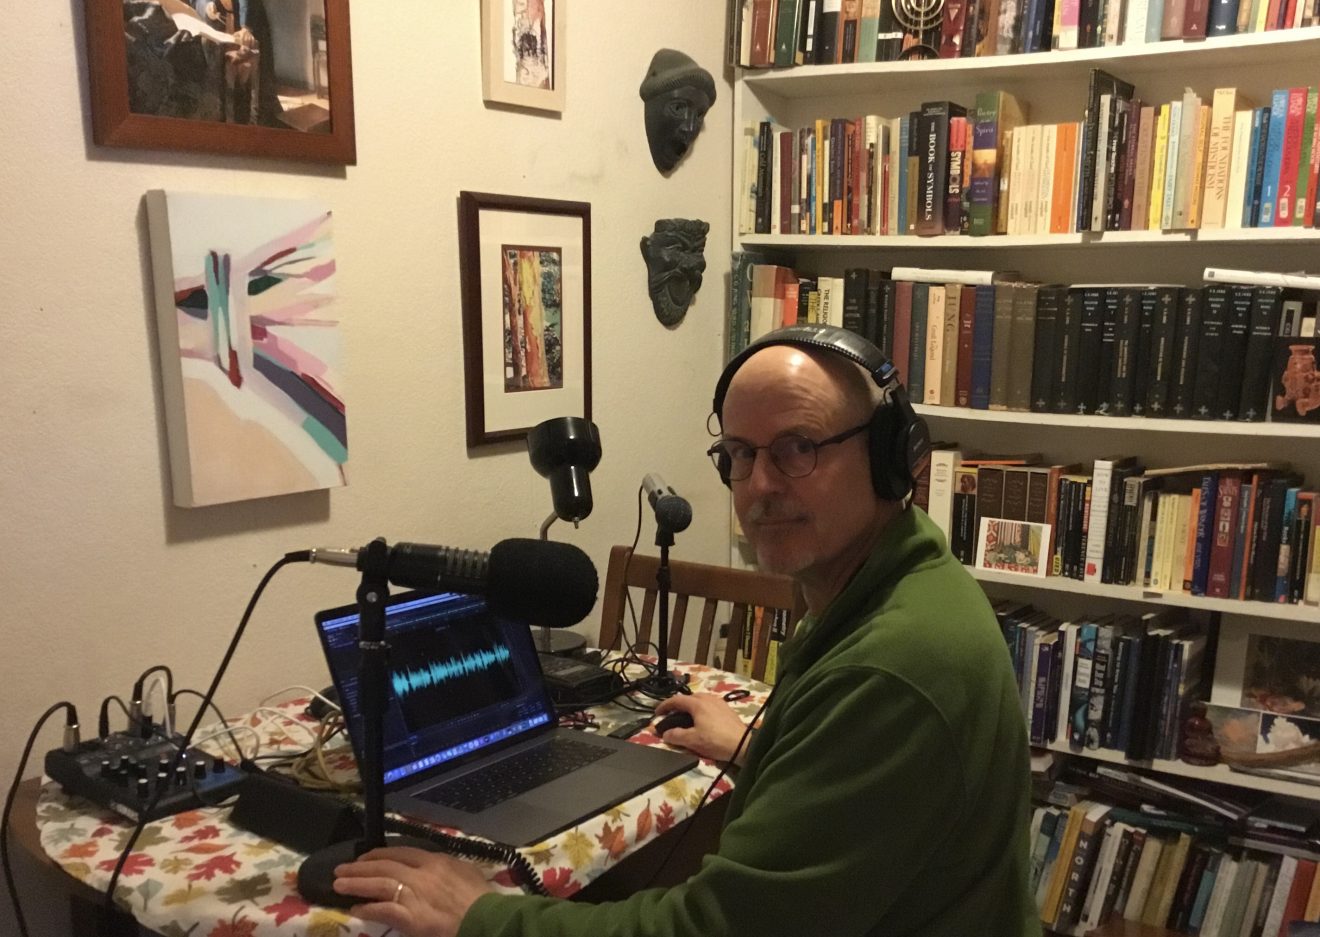 A man with headphones sits in front of a microphone and a laptop in a room filled with artwork and books, presumably a makeshift studio.